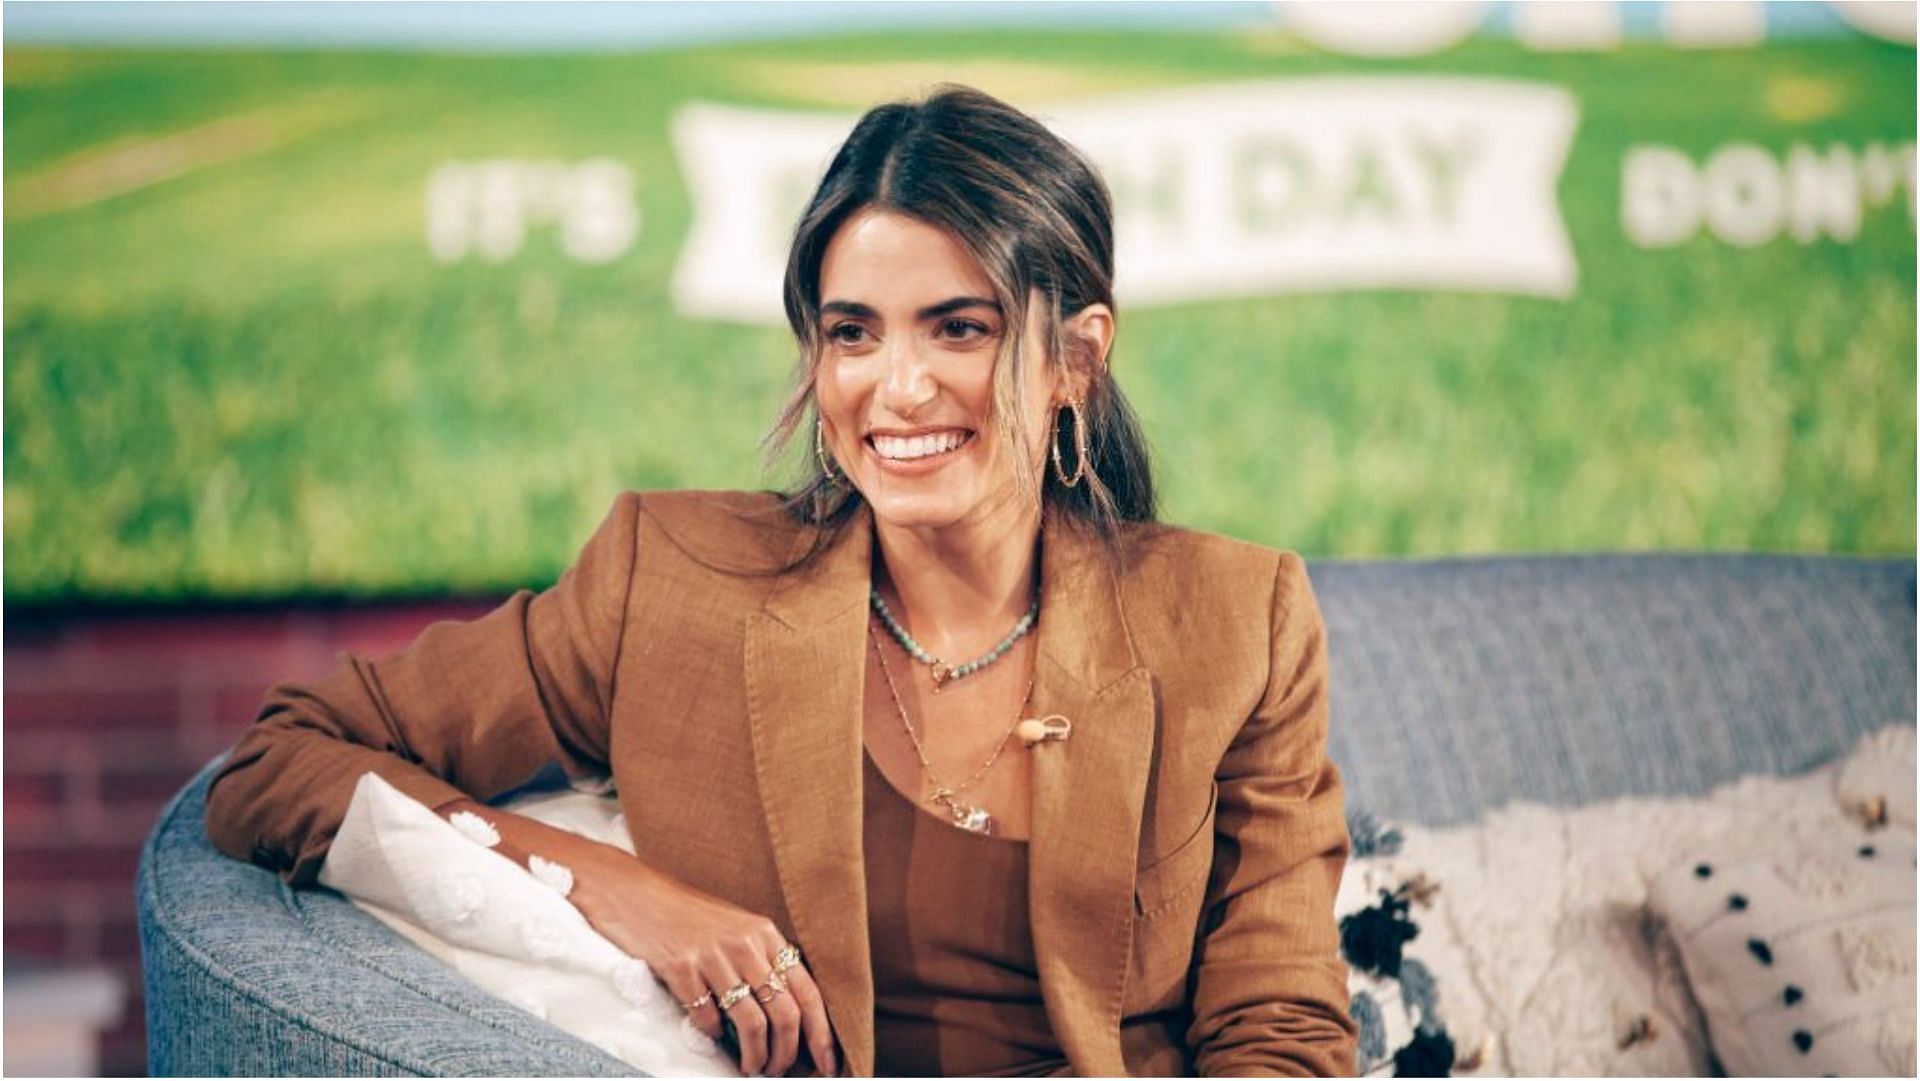 Nikki Reed is mostly known for her appearance in Twilight films (Image via Weiss Eubanks/Getty Images)